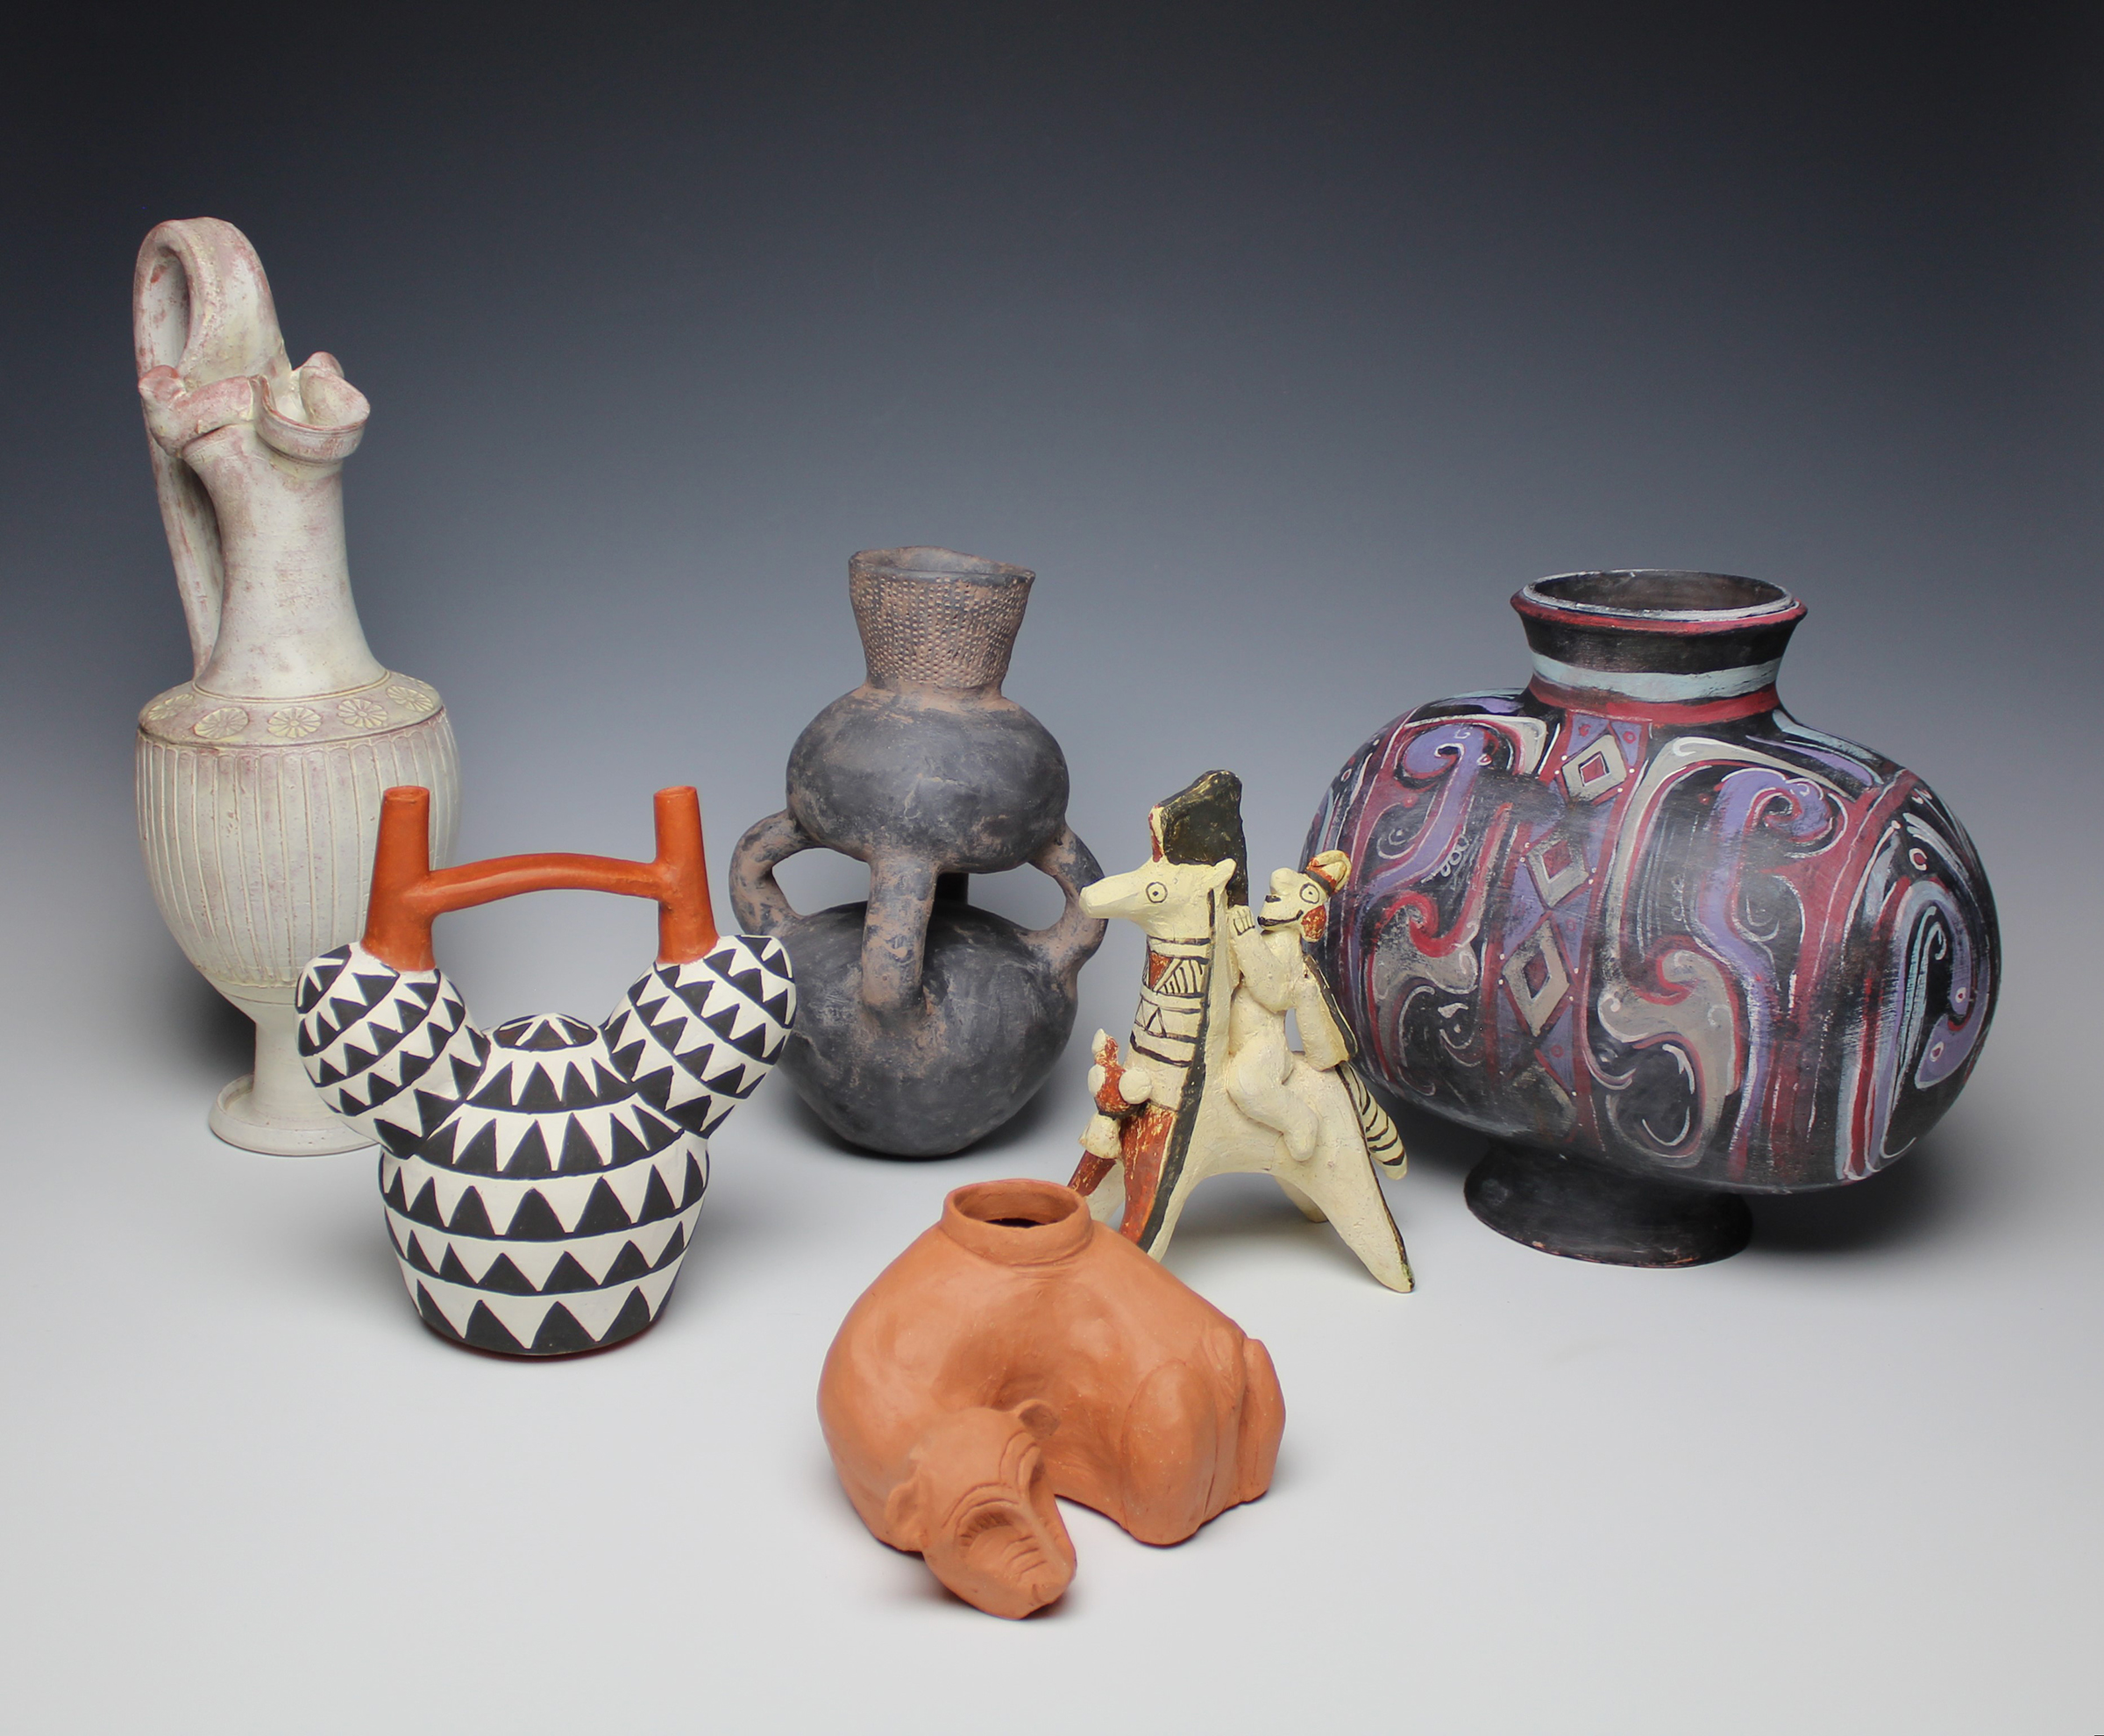 A grouping of objects from the exhibition "Making History." Courtesy photo.